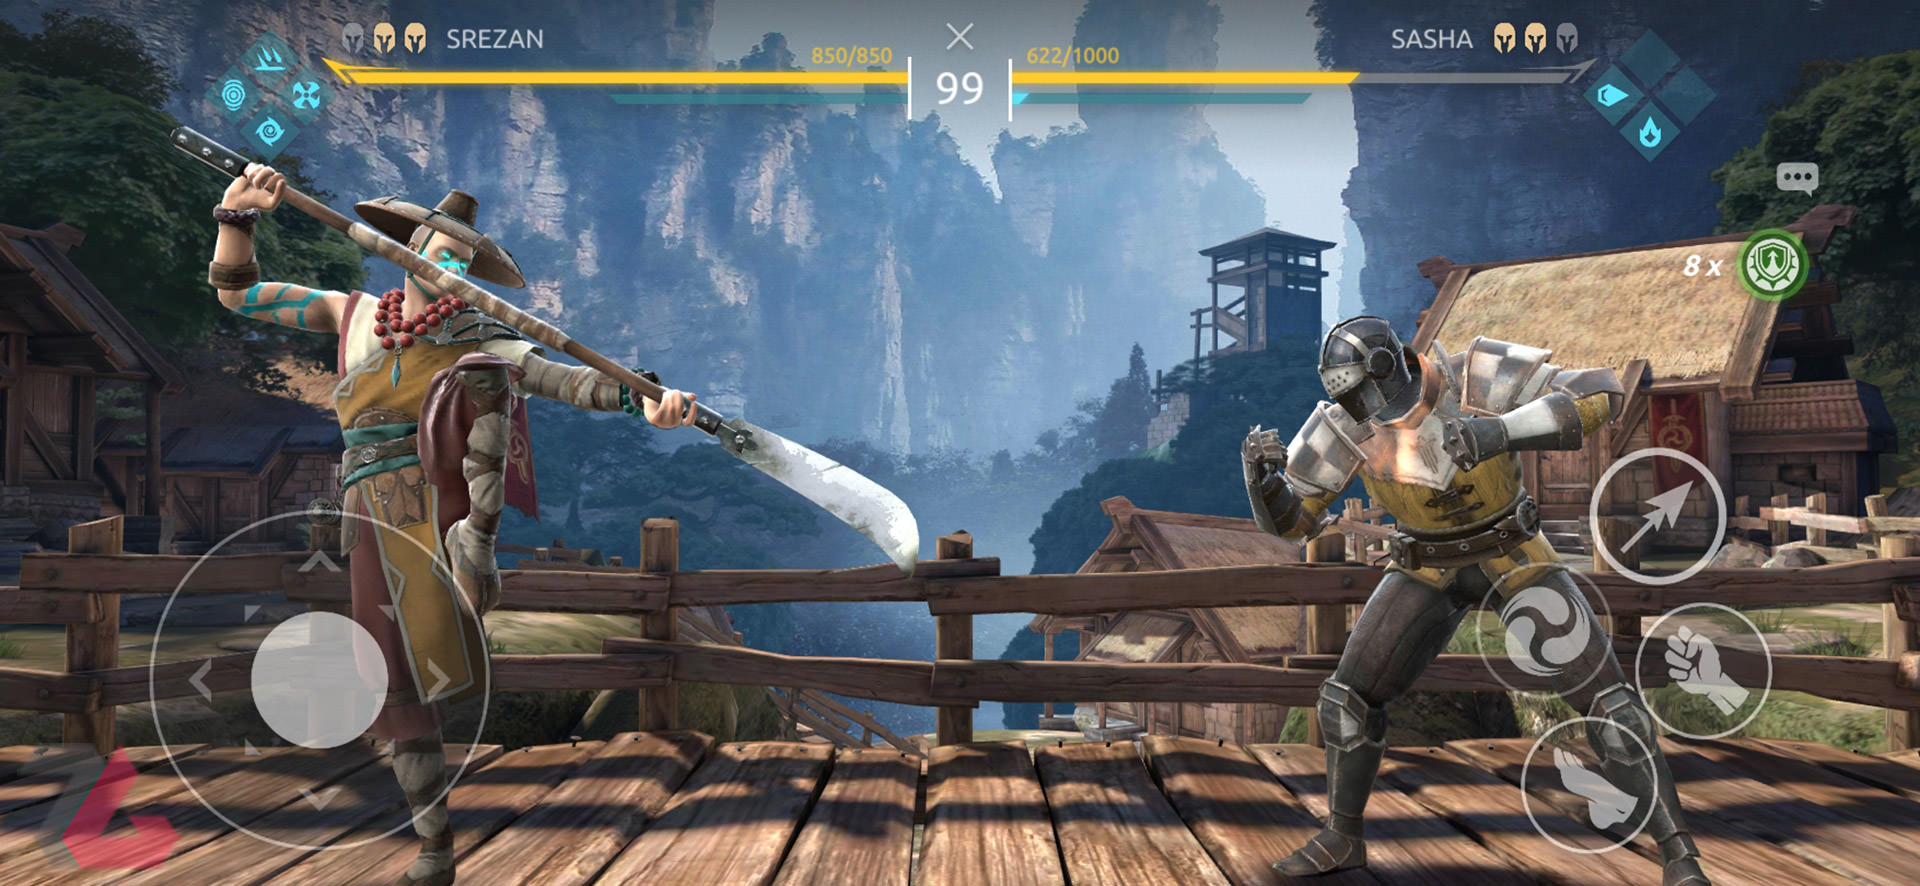 download shadow fight 4 arena for free